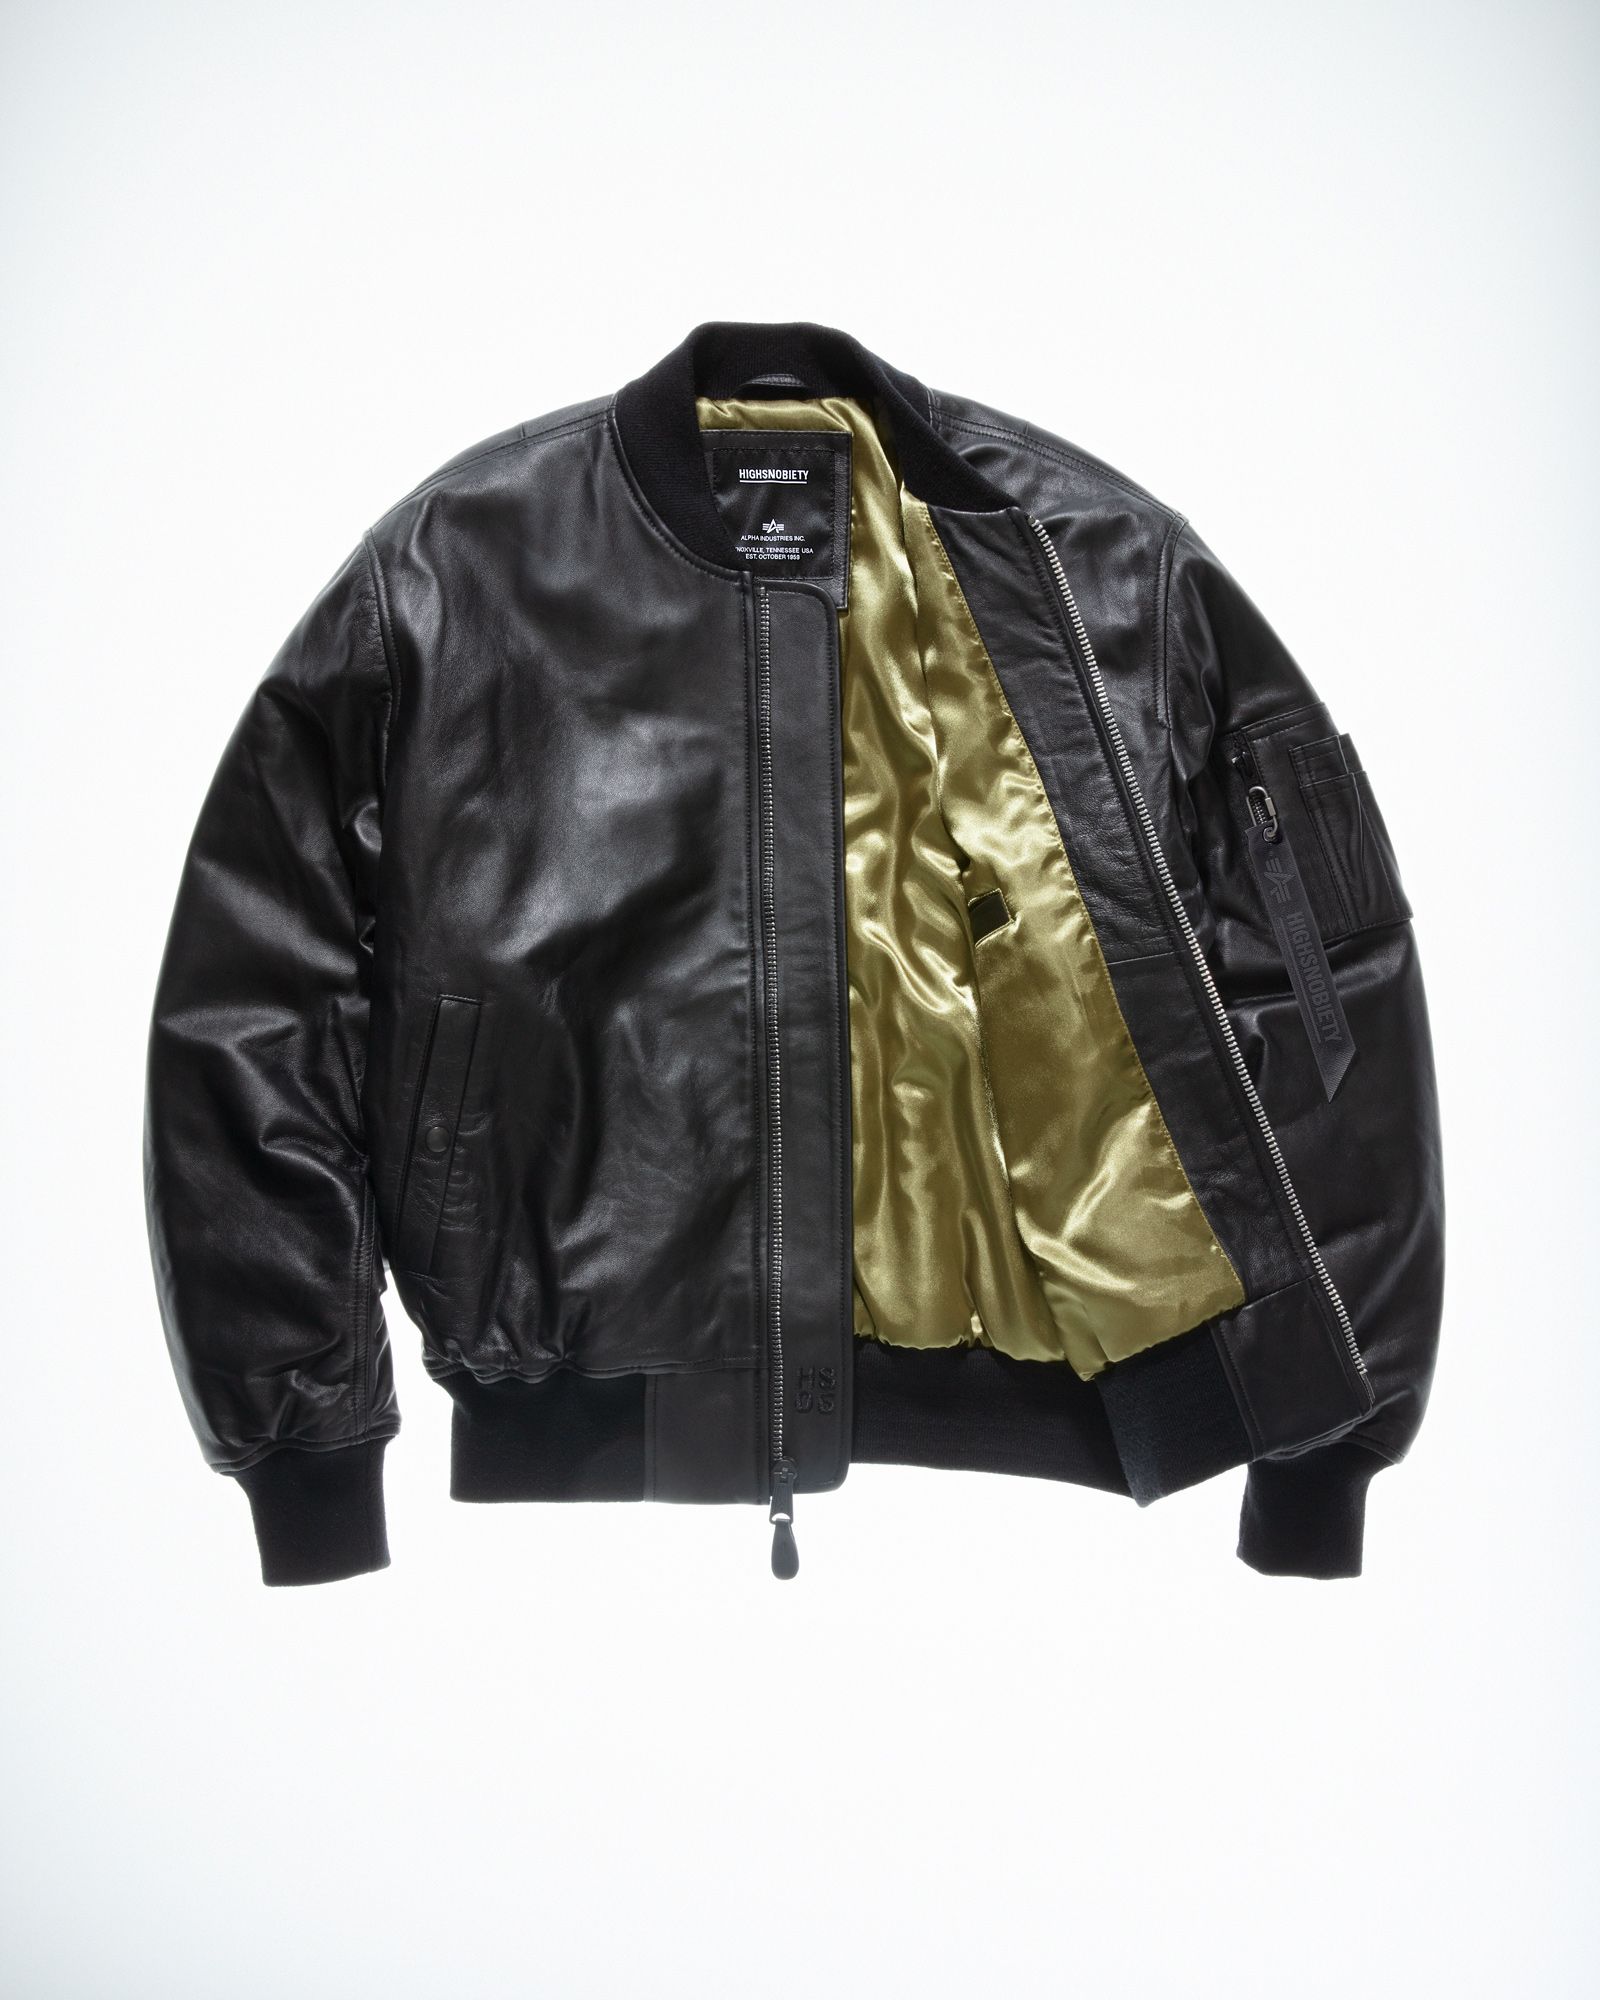 How The Bomber Jacket Formed and Subverted Subculture